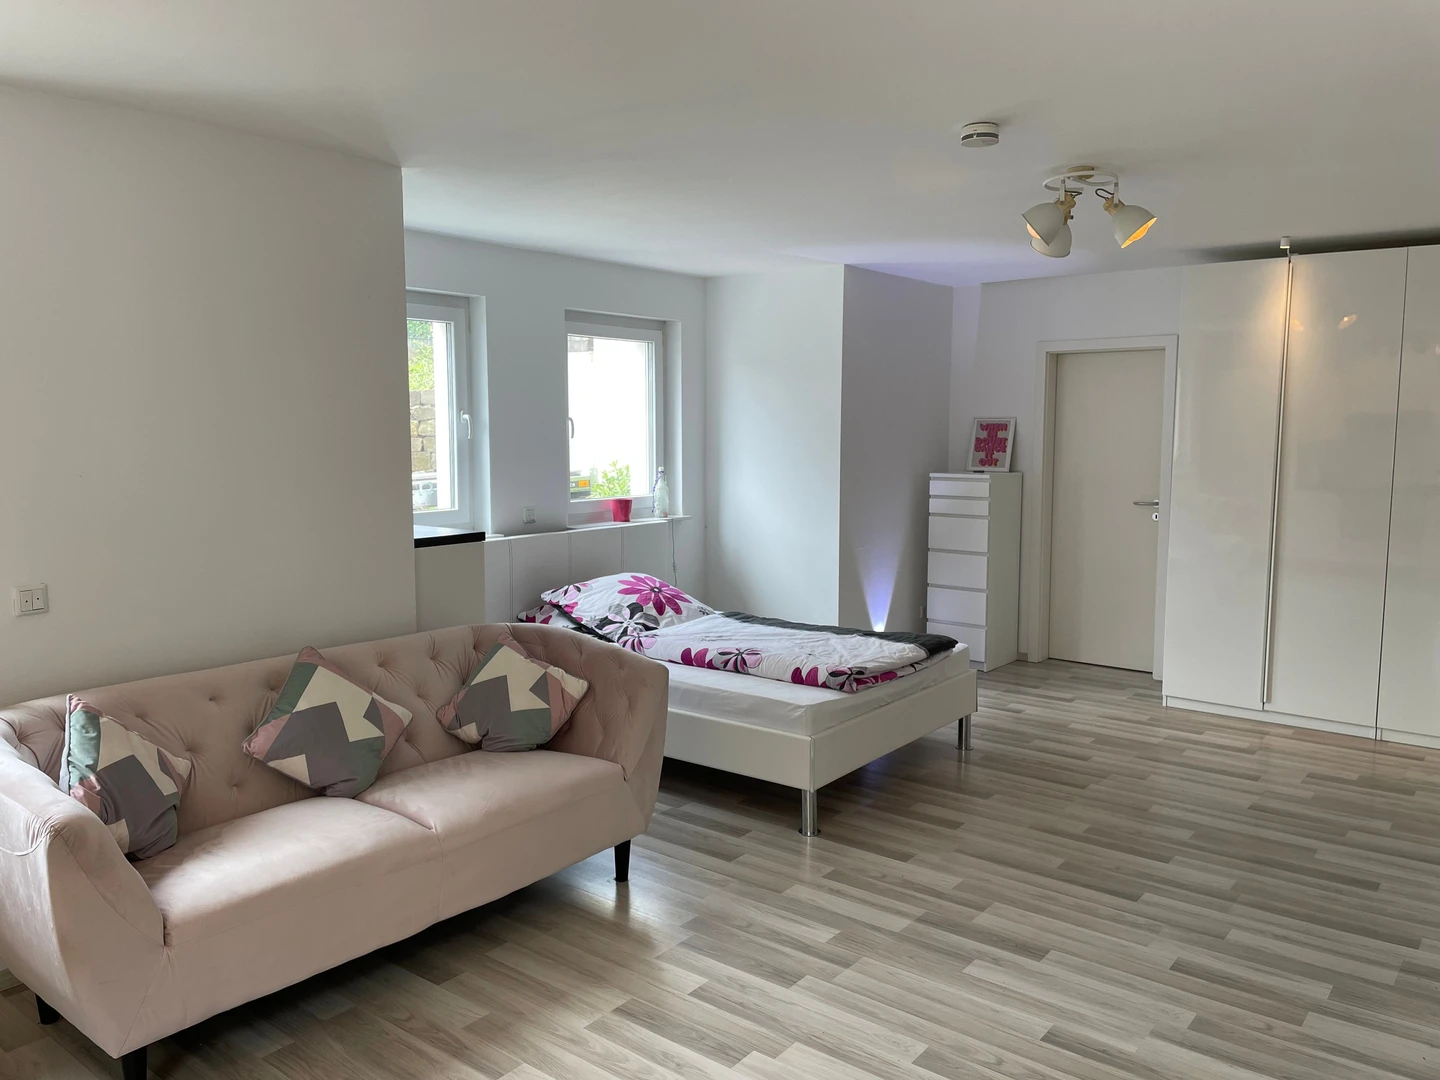 Renting rooms by the month in Wuppertal